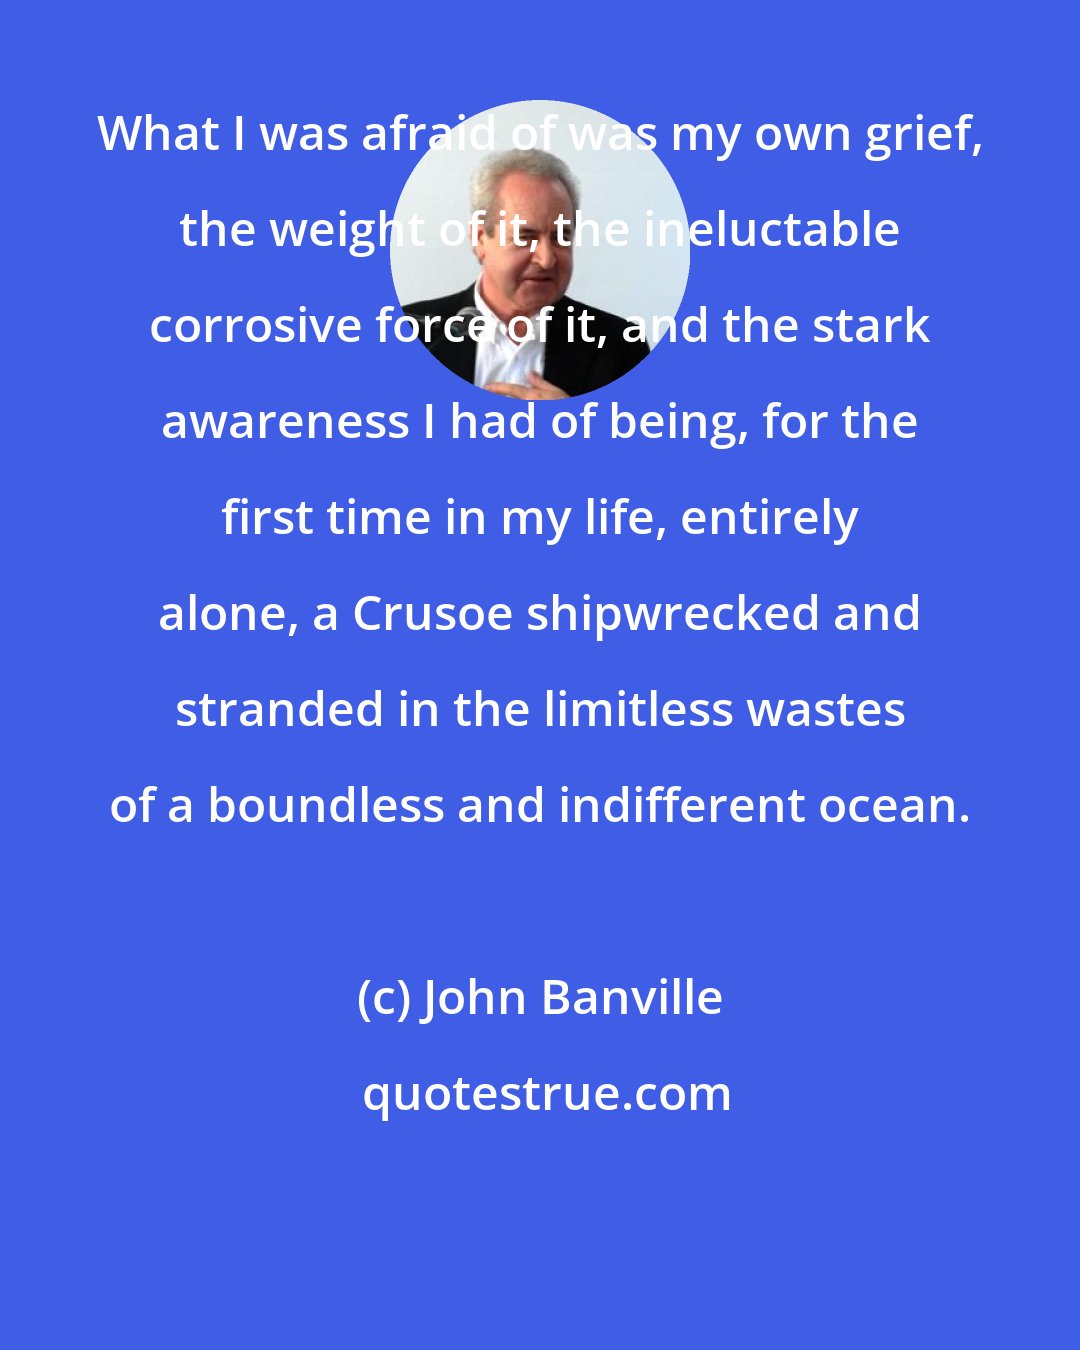 John Banville: What I was afraid of was my own grief, the weight of it, the ineluctable corrosive force of it, and the stark awareness I had of being, for the first time in my life, entirely alone, a Crusoe shipwrecked and stranded in the limitless wastes of a boundless and indifferent ocean.